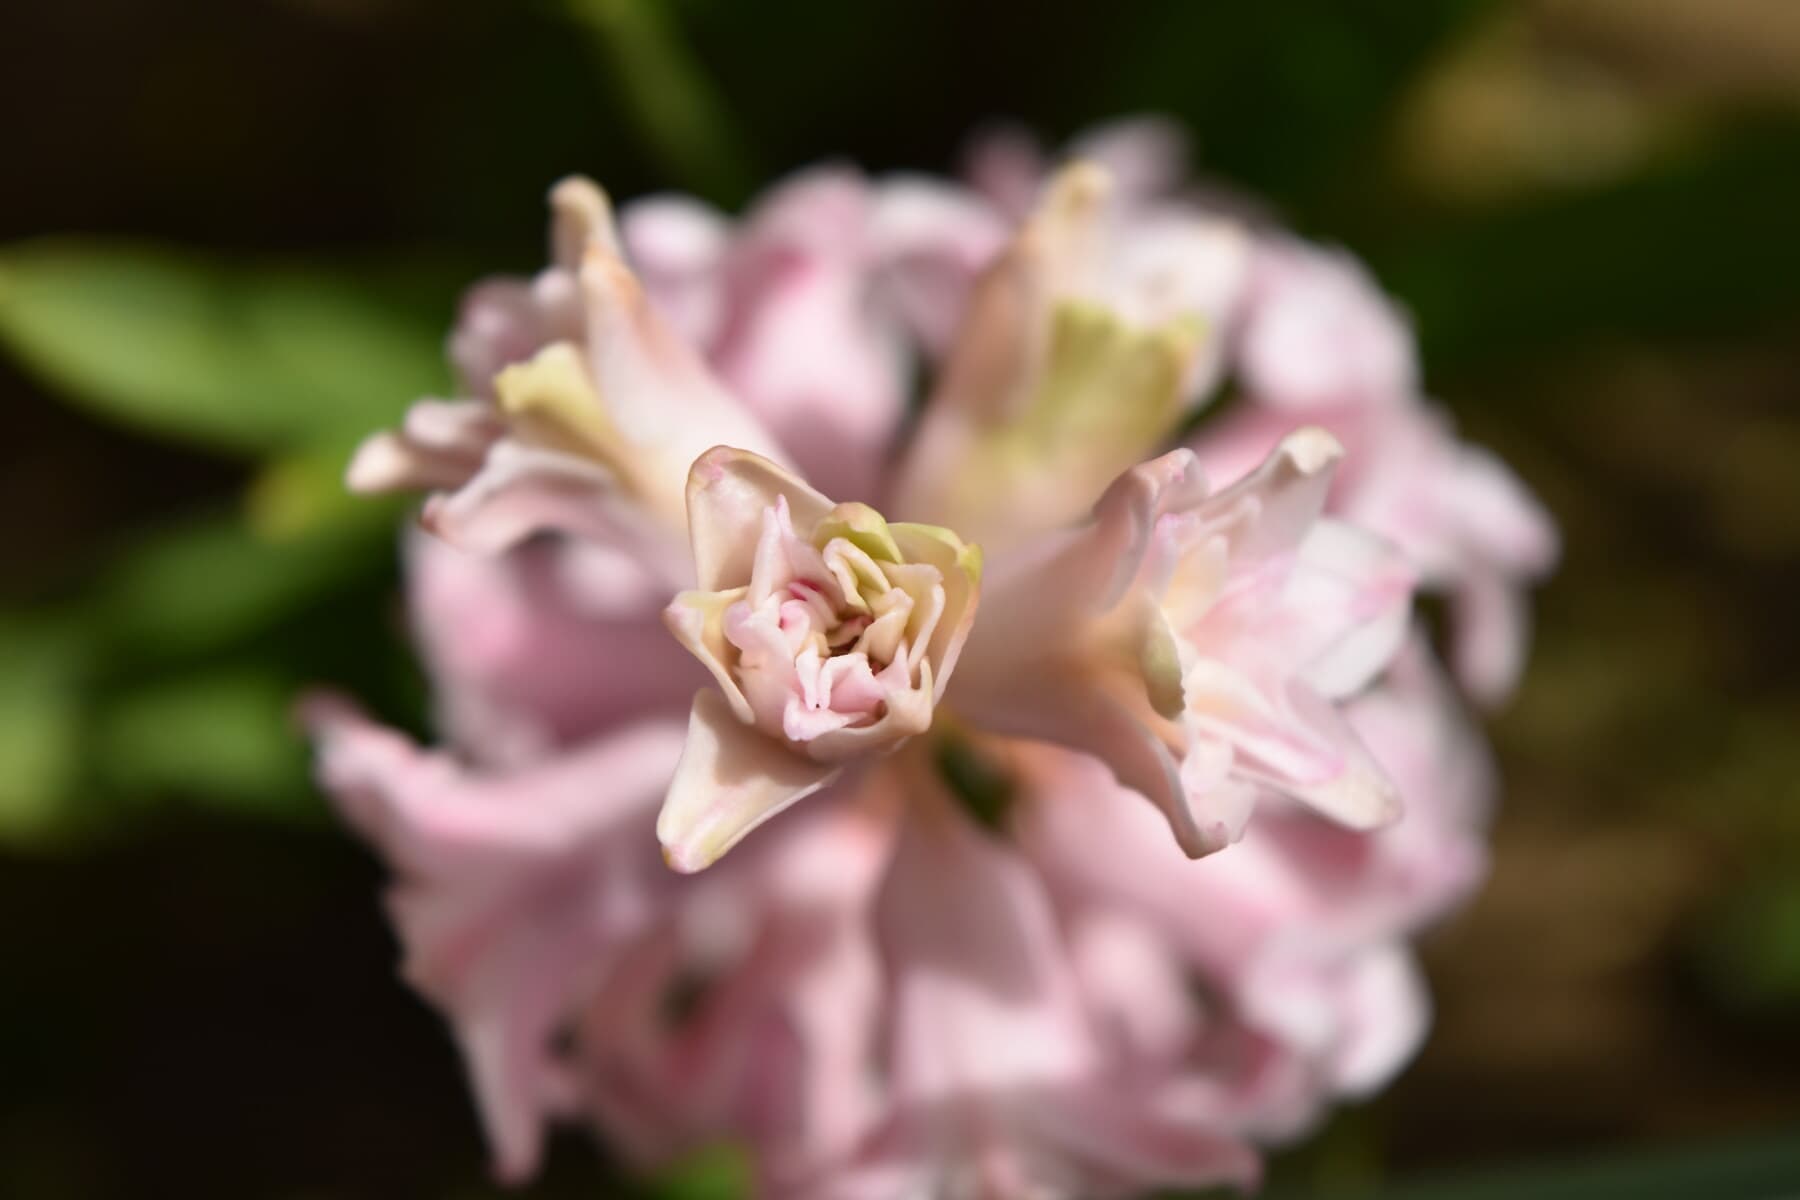 hyacinth, pink, detail, close-up, focus, blurry, herb, plant, flowers, blossom